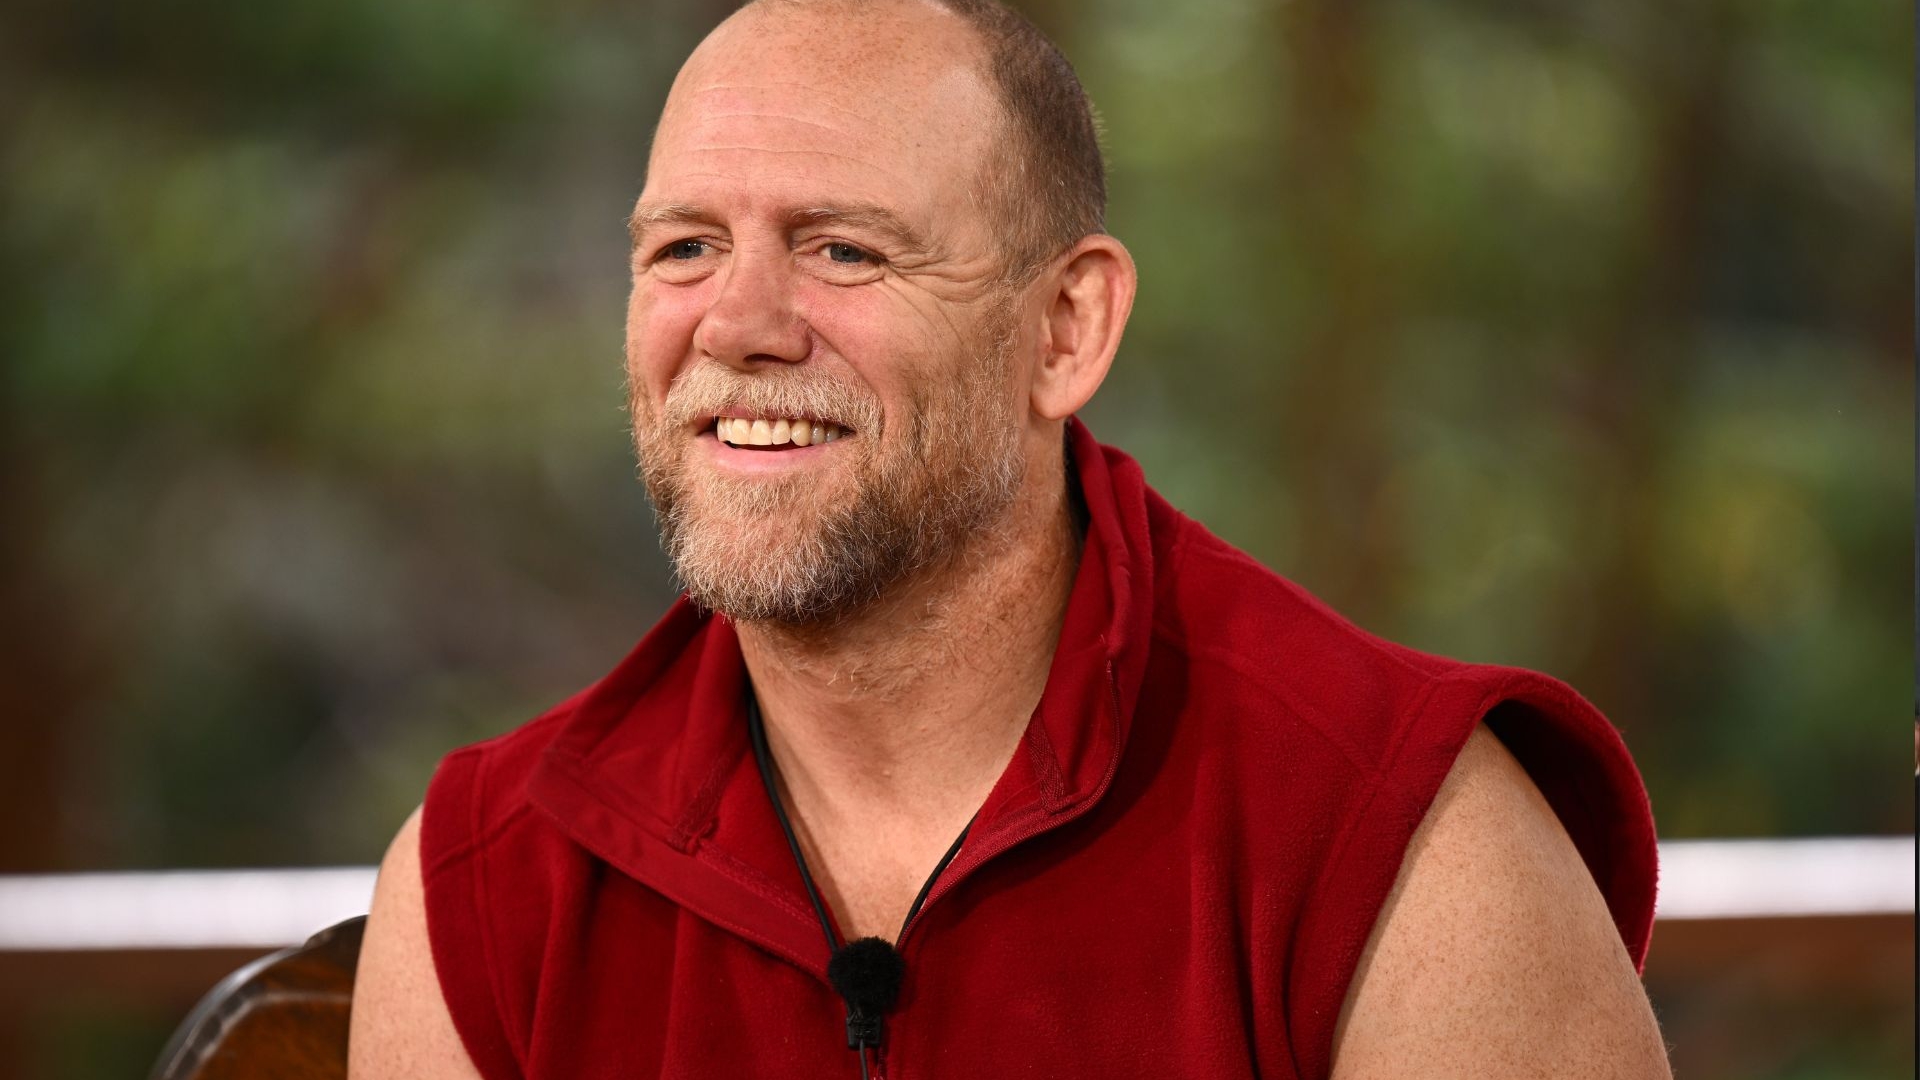 “I’m a Celebrity” 2022 LIVE: Frustration after Mike Tindall DUMPED Matt Hancock to be Owen & Jill joint favorites to win